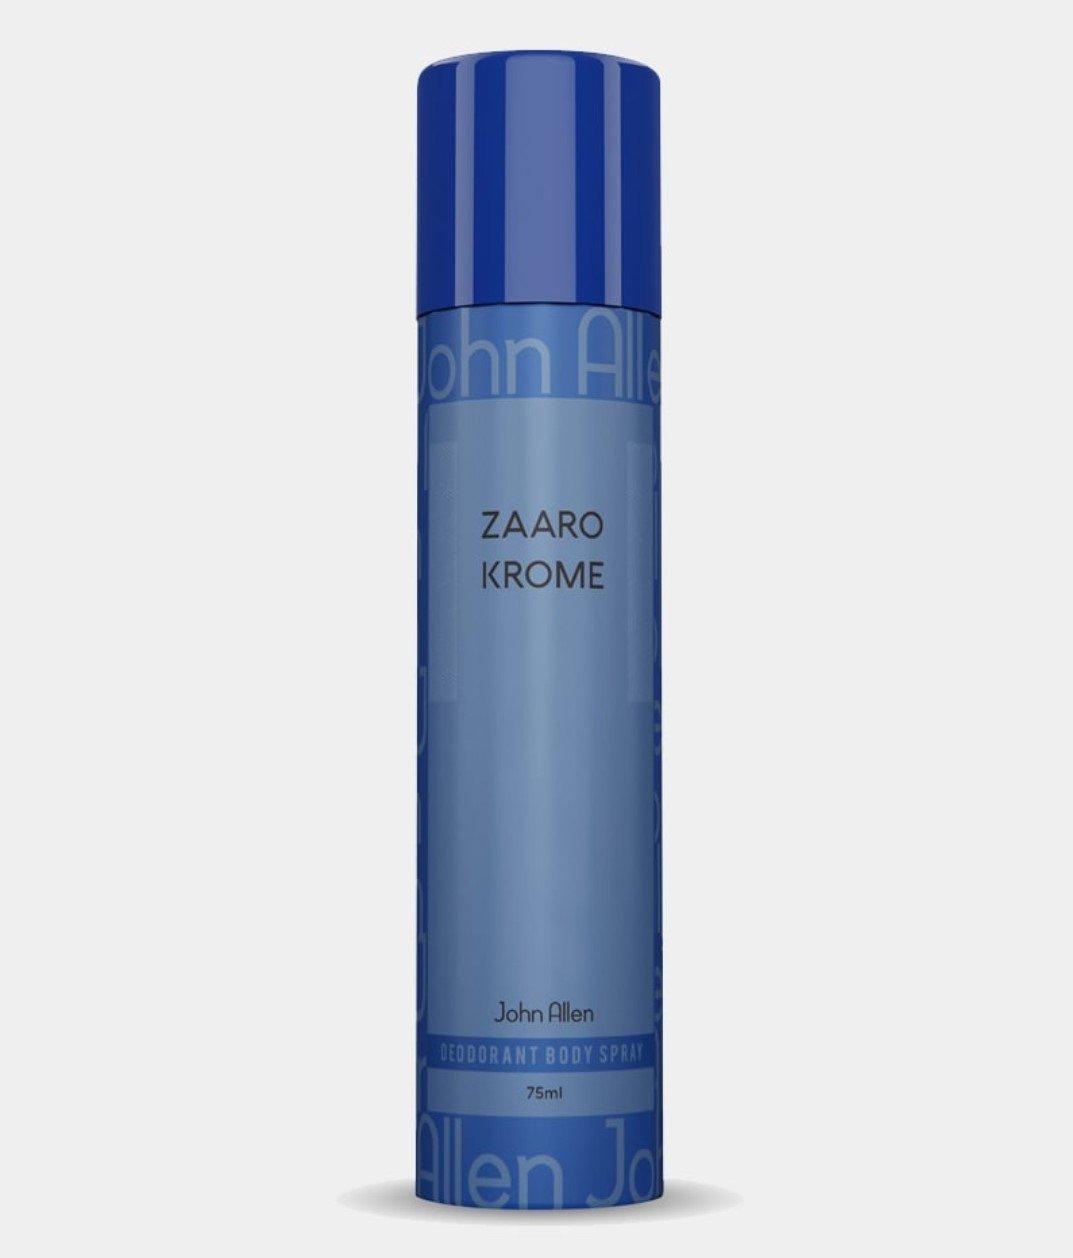 John Allen Zaaro Krome Deodorant 75 ML Sensual, Smooth and Long Lasting Fragrance No Dyes, No Parabens, No Harmful Chemicals. Safe on skin and formulated for daily use to keep you fresh all day. Quantity: 75ml Usage: Give it a good hard shake first to make sure all the ingredients are mixed together before you spray it. You should hold the can approximately 15 cm from your body or clothes as you spray it. It is recommended to use deodorant body sprays post shower. Also pick from other variants from John Allen Deodorant Body Sprays.